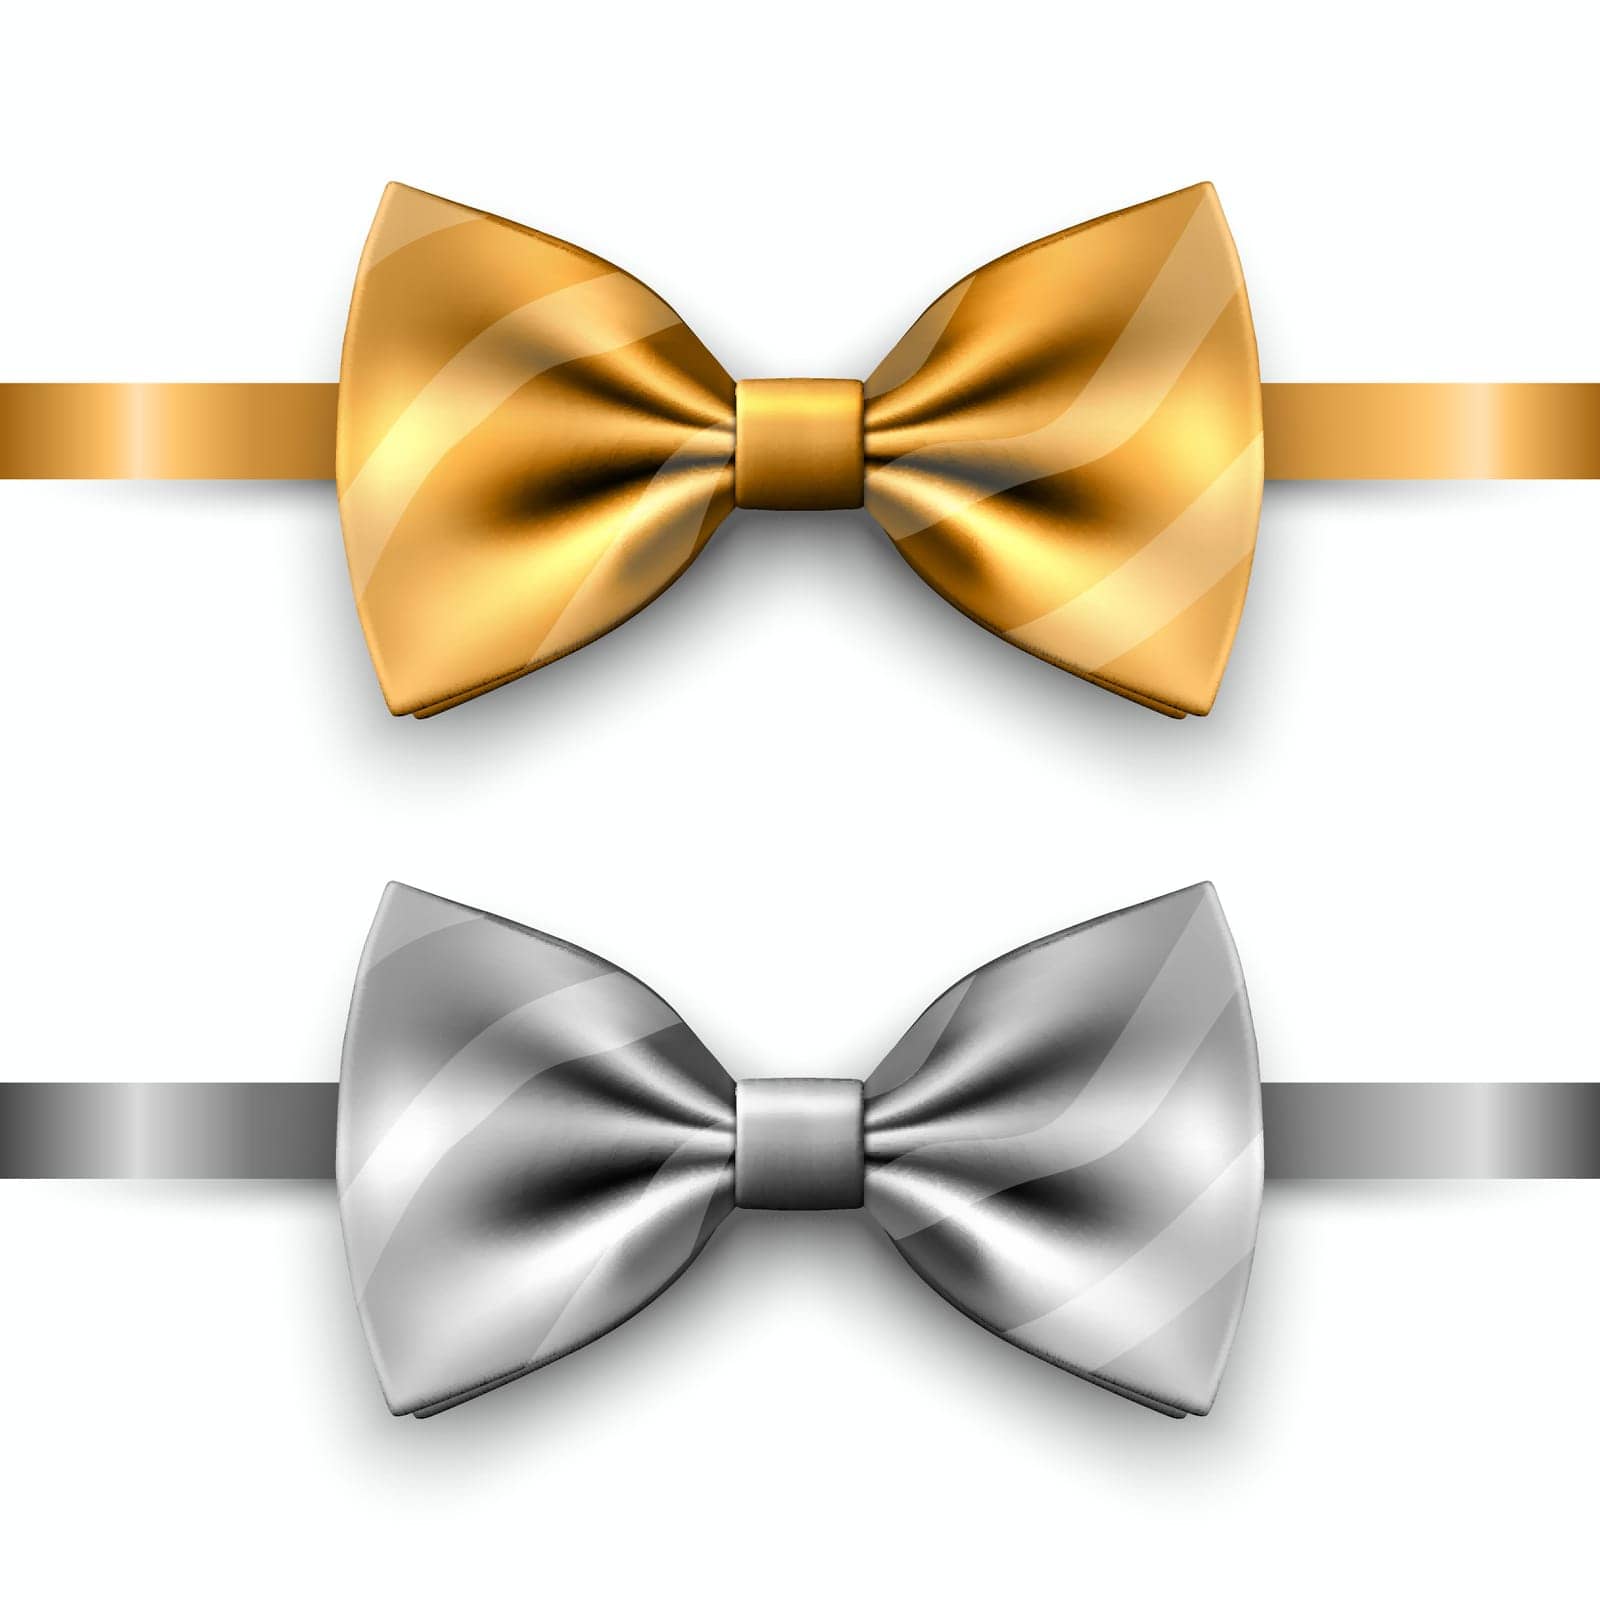 Vector 3D Realistic Golden, Silver Bow Tie Icon Set Closeup Isolated. Silk Glossy Bowtie, Tie Gentleman. Mockup, Design Template of Stylish Bow Tie for Men. Fashion, Father's Day Holiday Concept by Gomolach